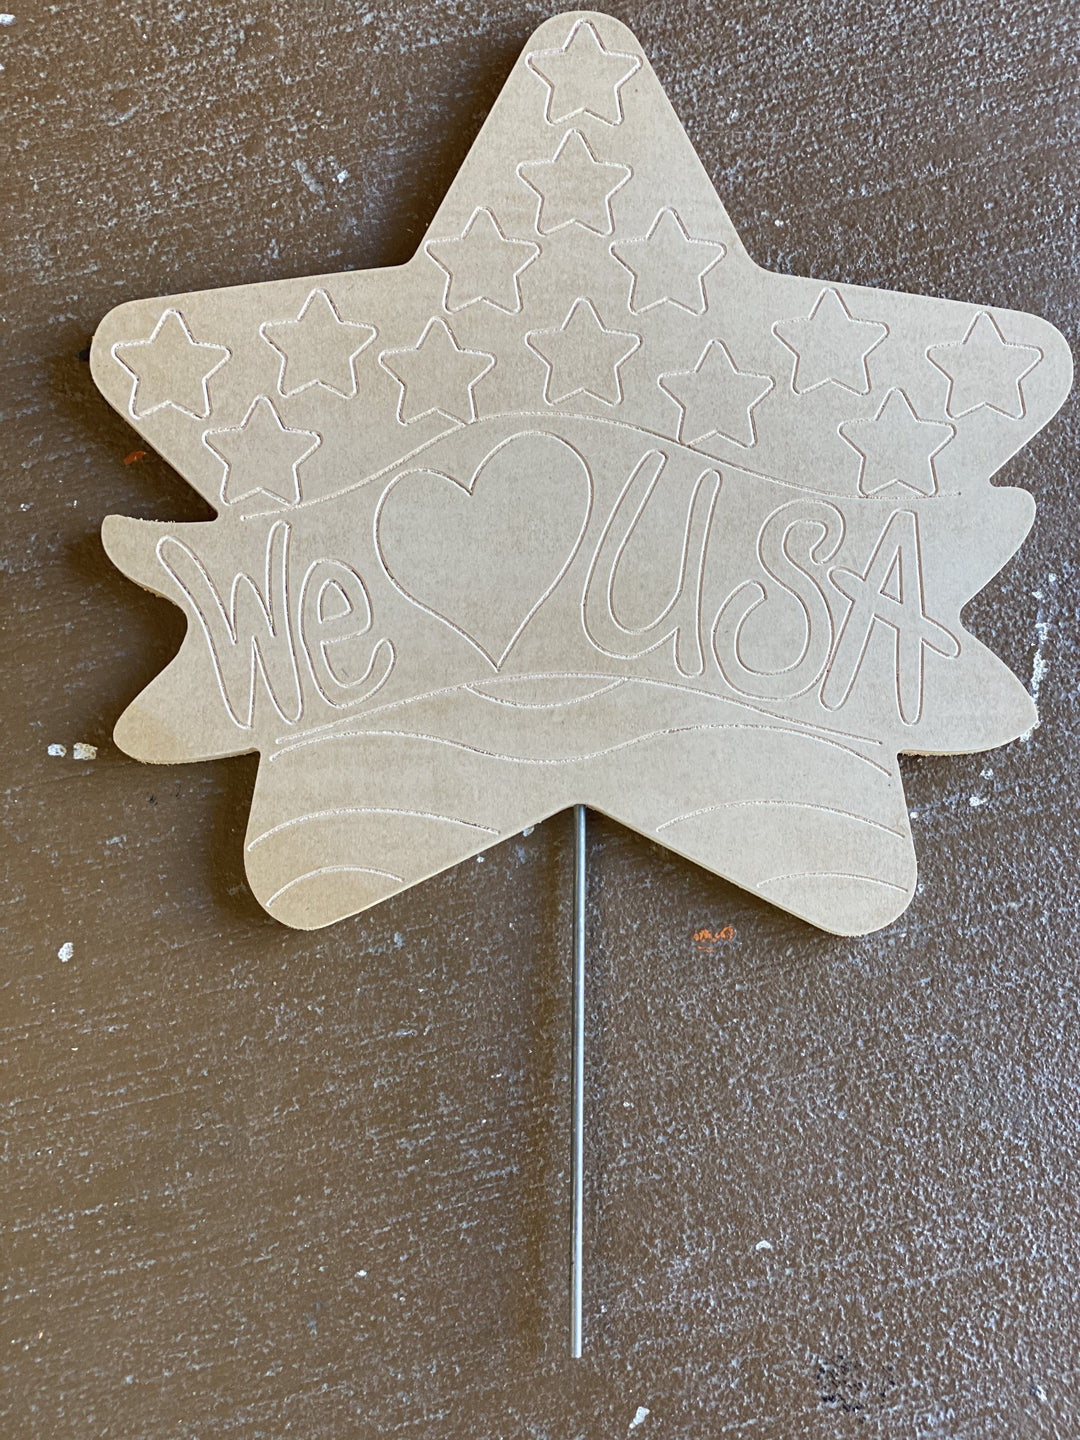 Star with USA Banner Etched Blank ready to be painted by you